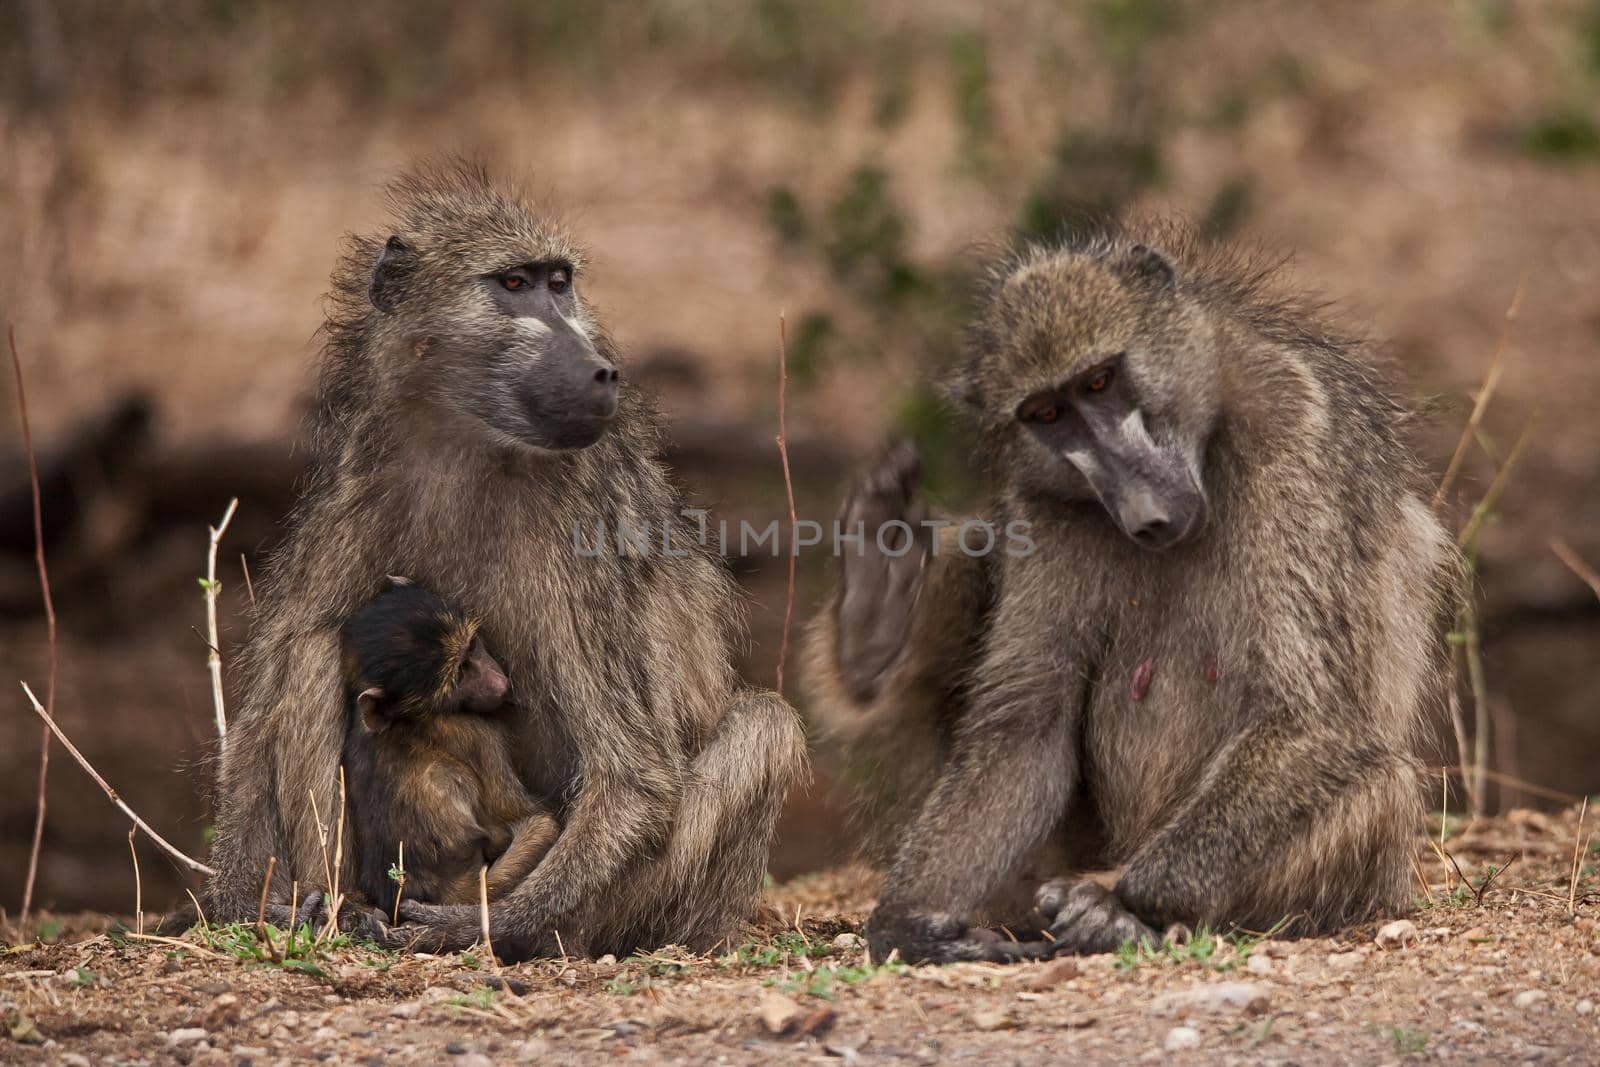 Two female Chacma Baboon (Papio ursinus), one with her baby, enjoying the late afternoon sunlight.